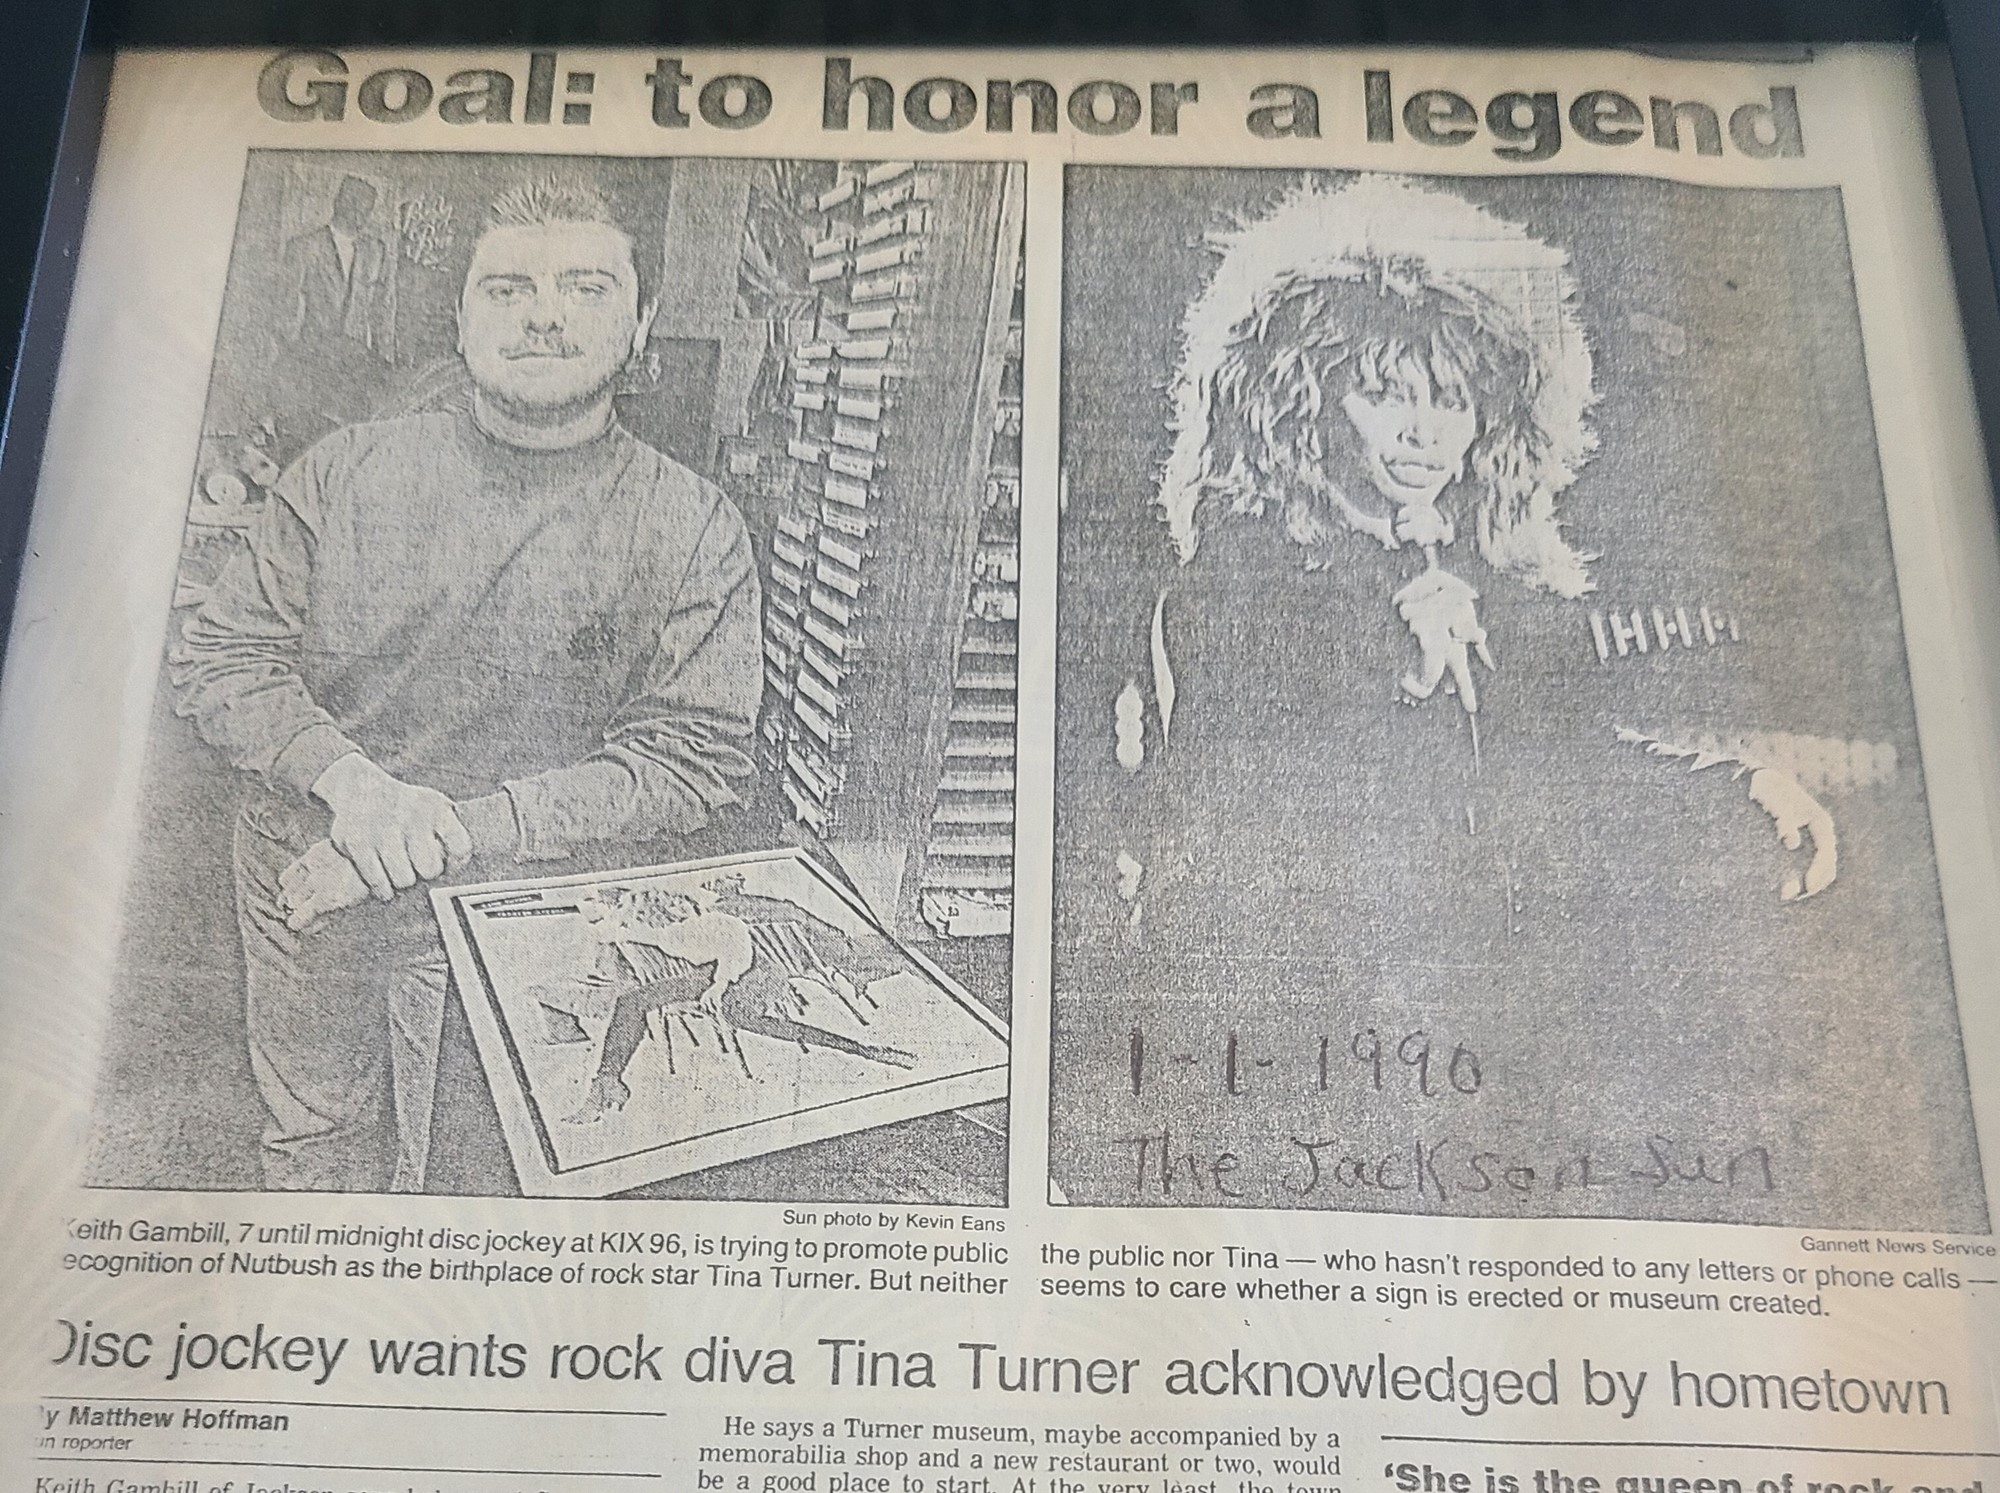 A photo of a newspaper cut out with the headline 'Goal: to honor a legend'.